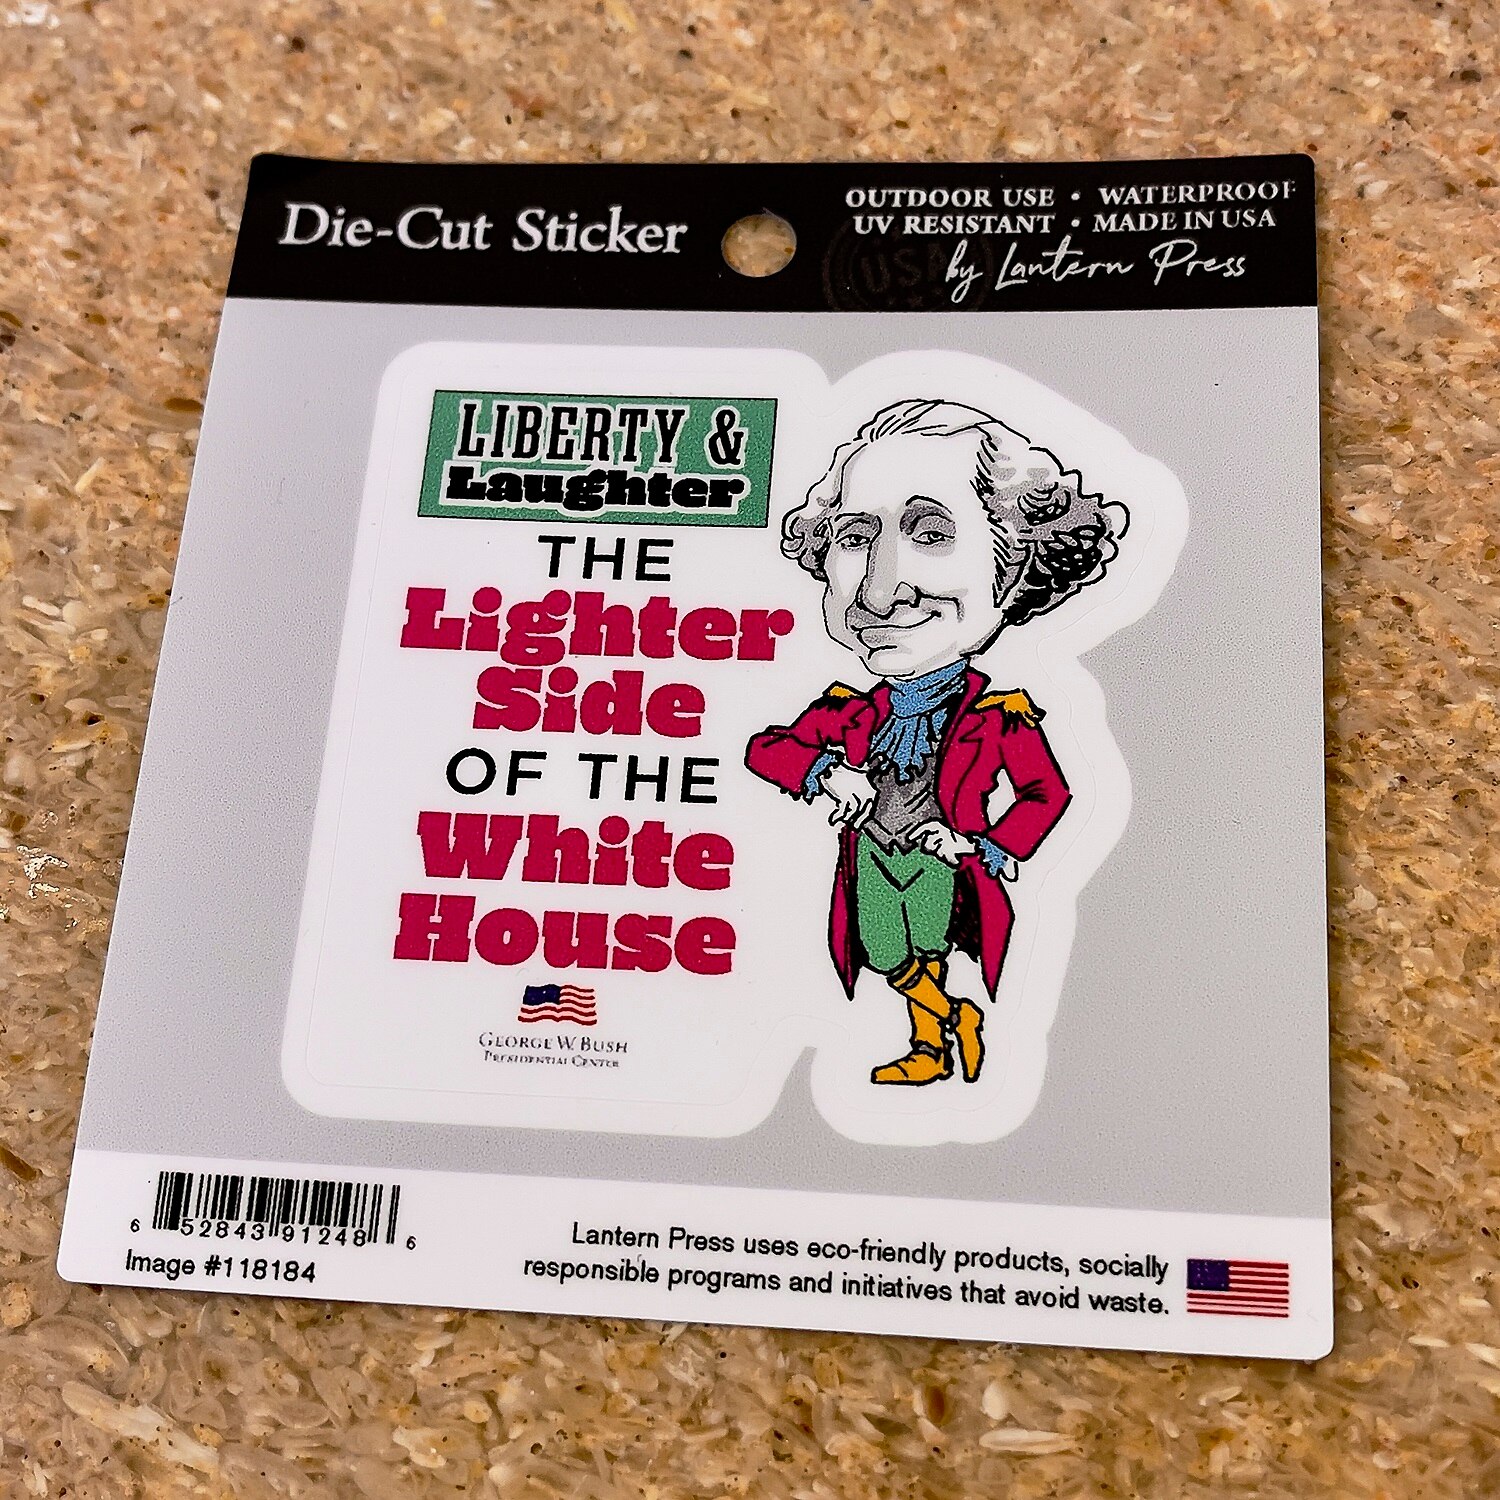 George Washington Liberty and Laughter Exhibit Sticker